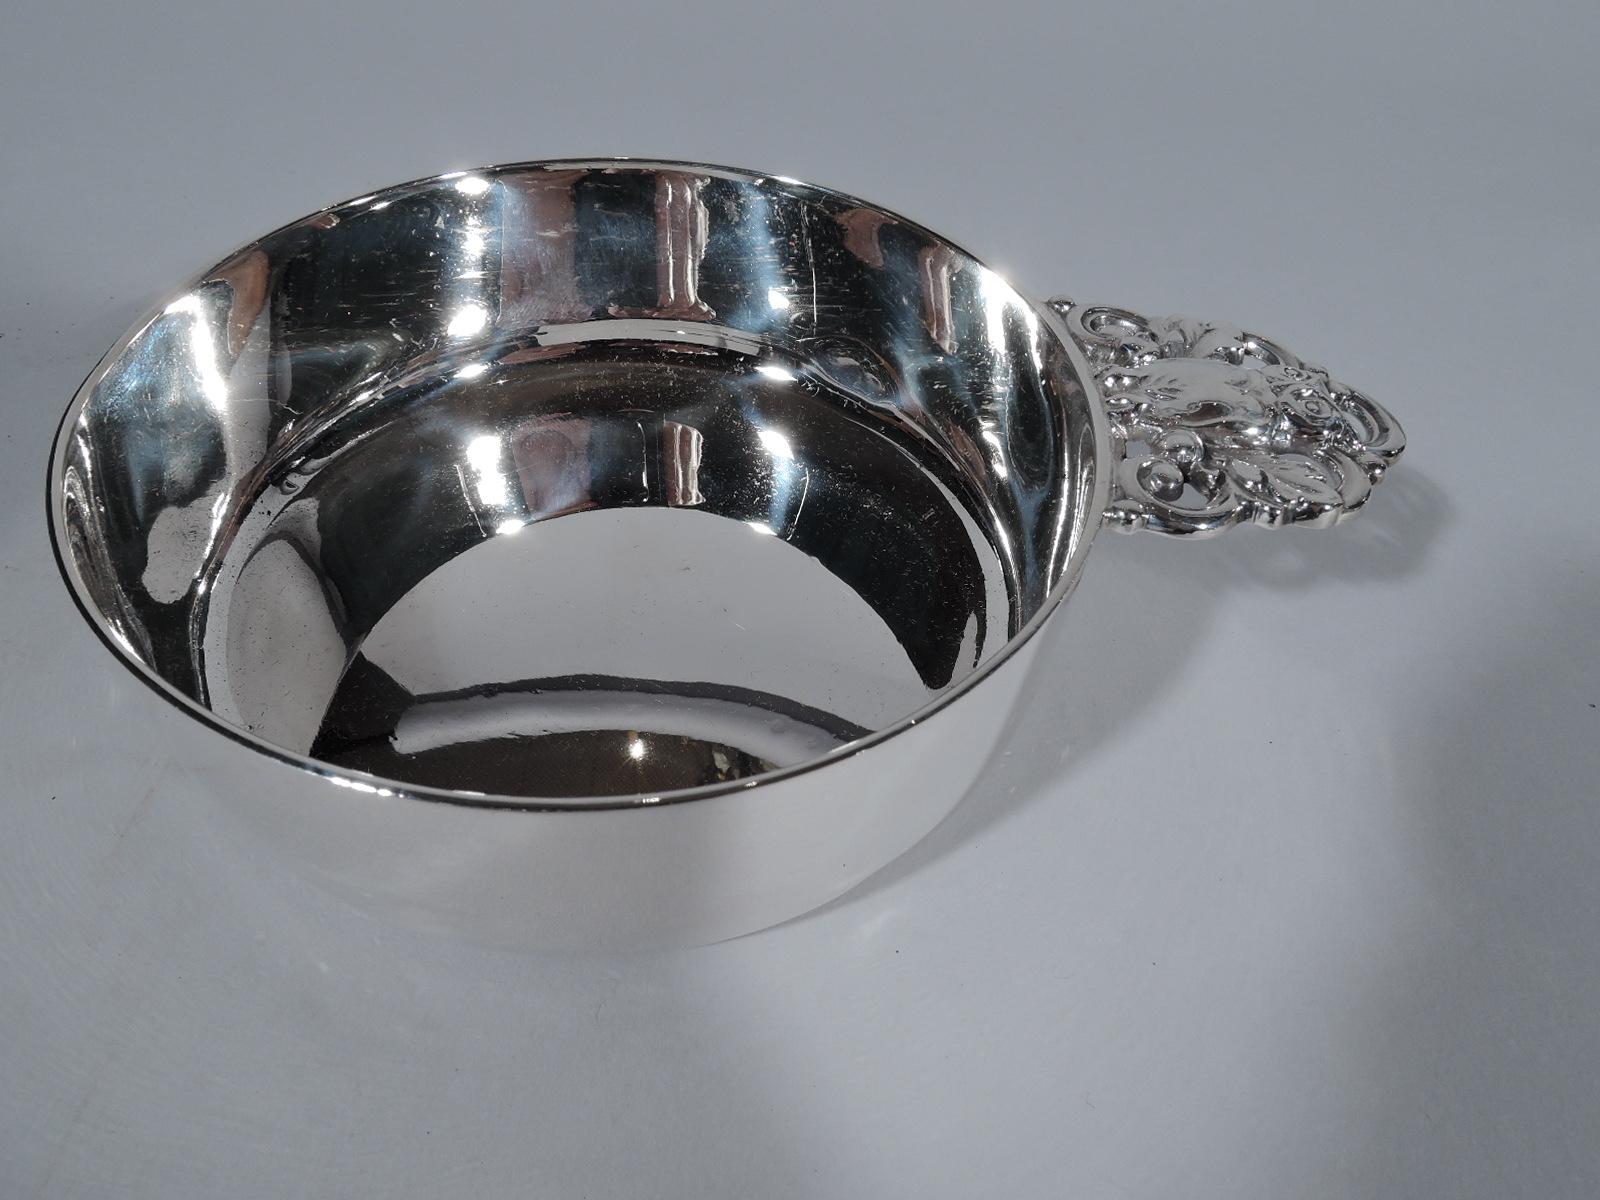 Mid-Century Modern sterling silver porringer. Made by Tiffany & Co. in New York. Straight sides and open cinquefoil with applied leaves and owl exuding stern sagacity. Fully marked including pattern no. 23110 and director’s letter M (1947-56).